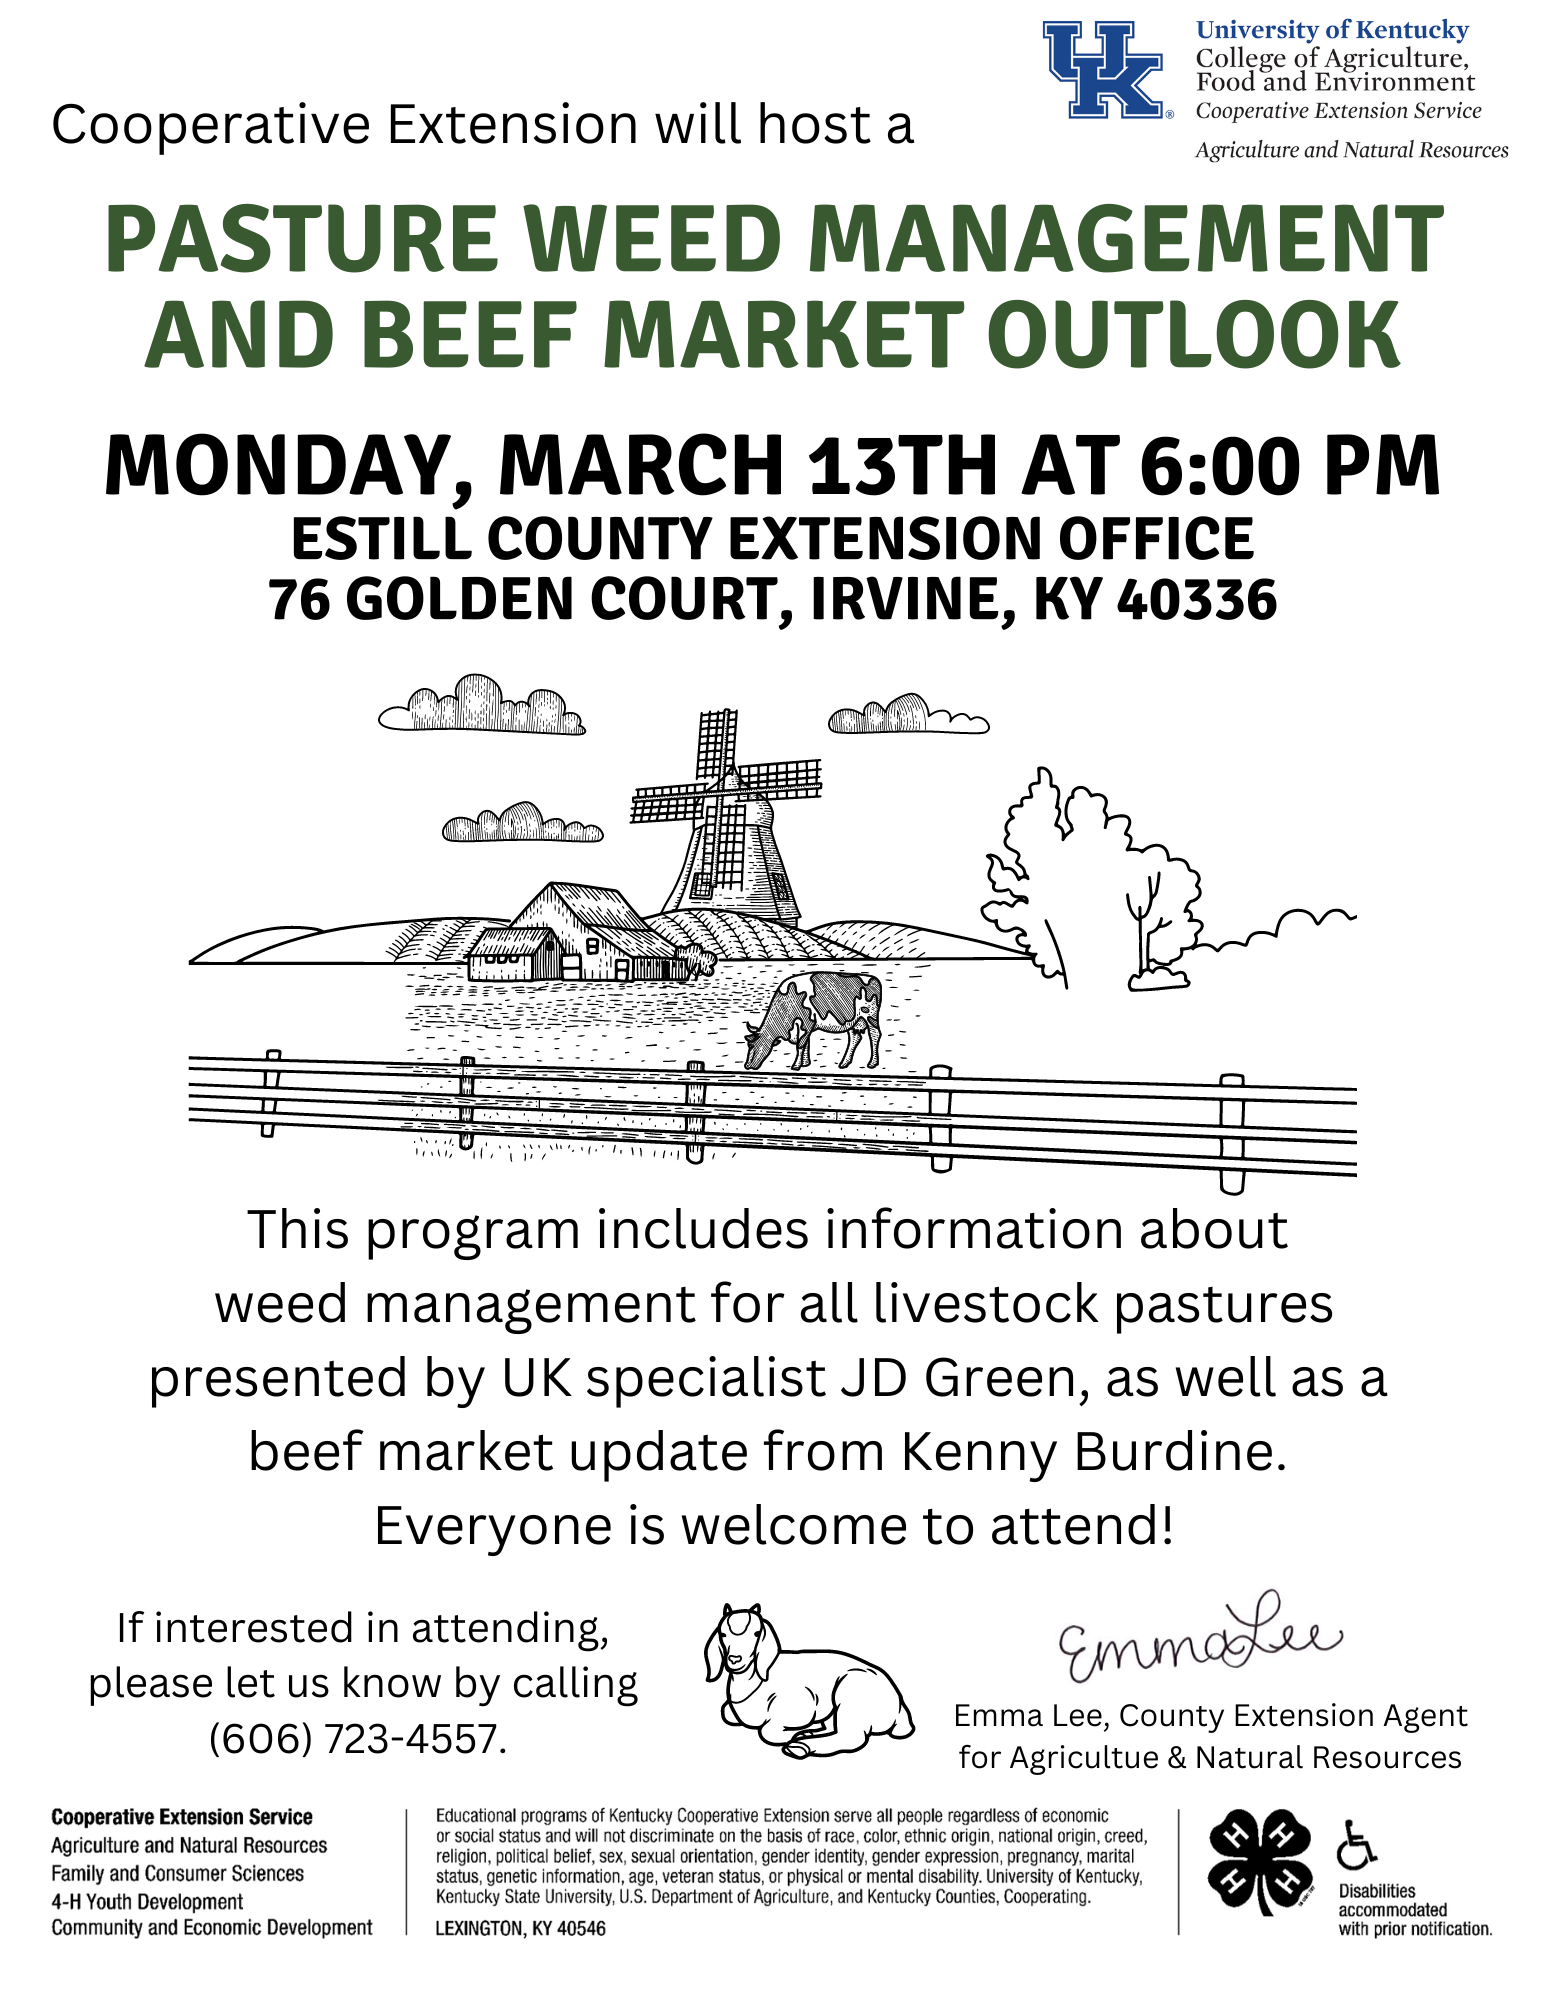 Flyer for March 13 Pasture Weed Management and Beef Market Outlook meeting